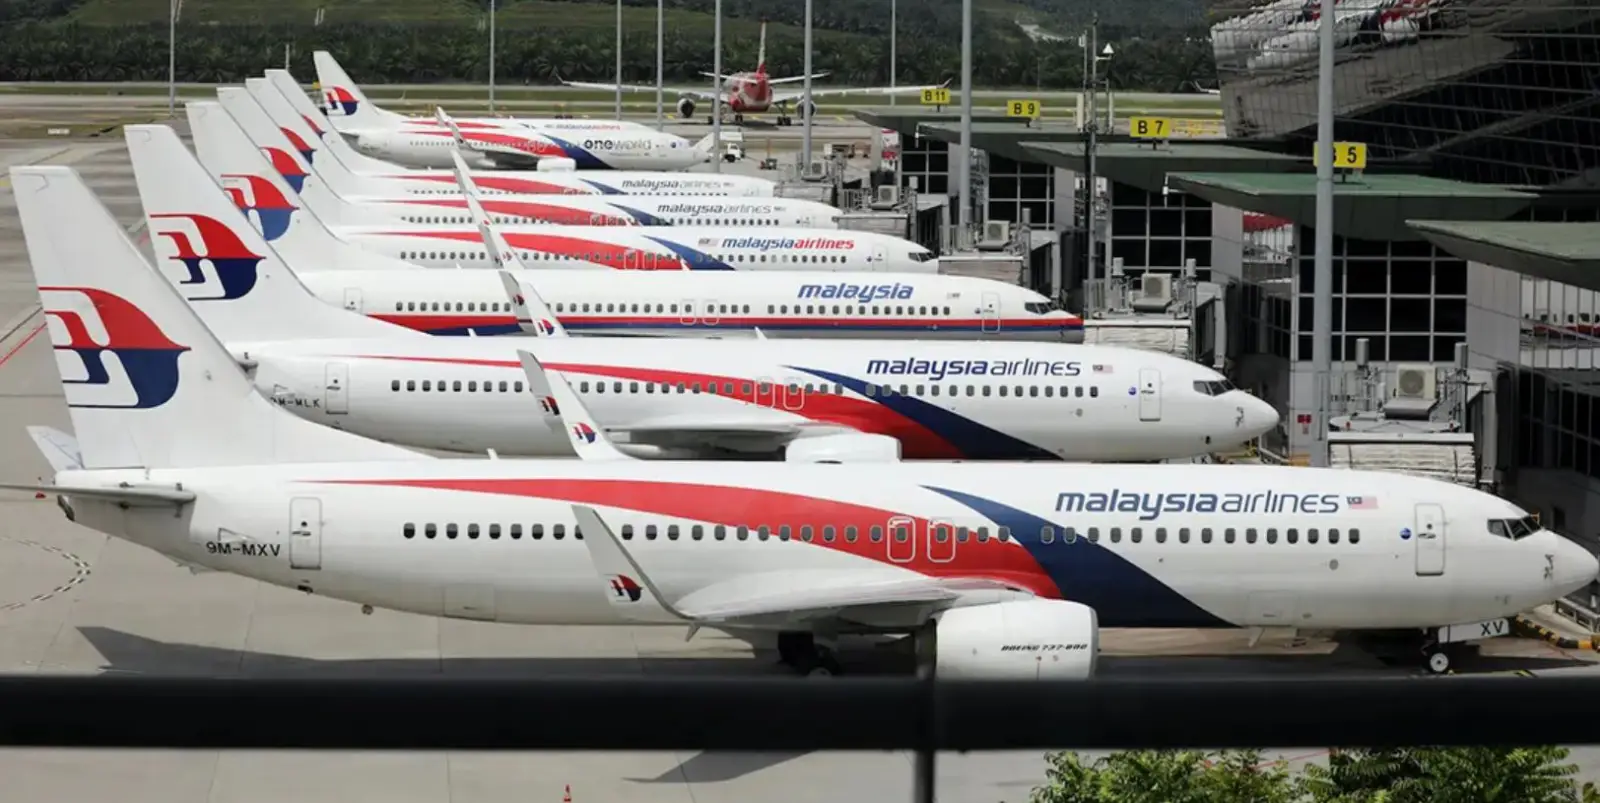 KL International Airport Malaysia Airlines aircraft